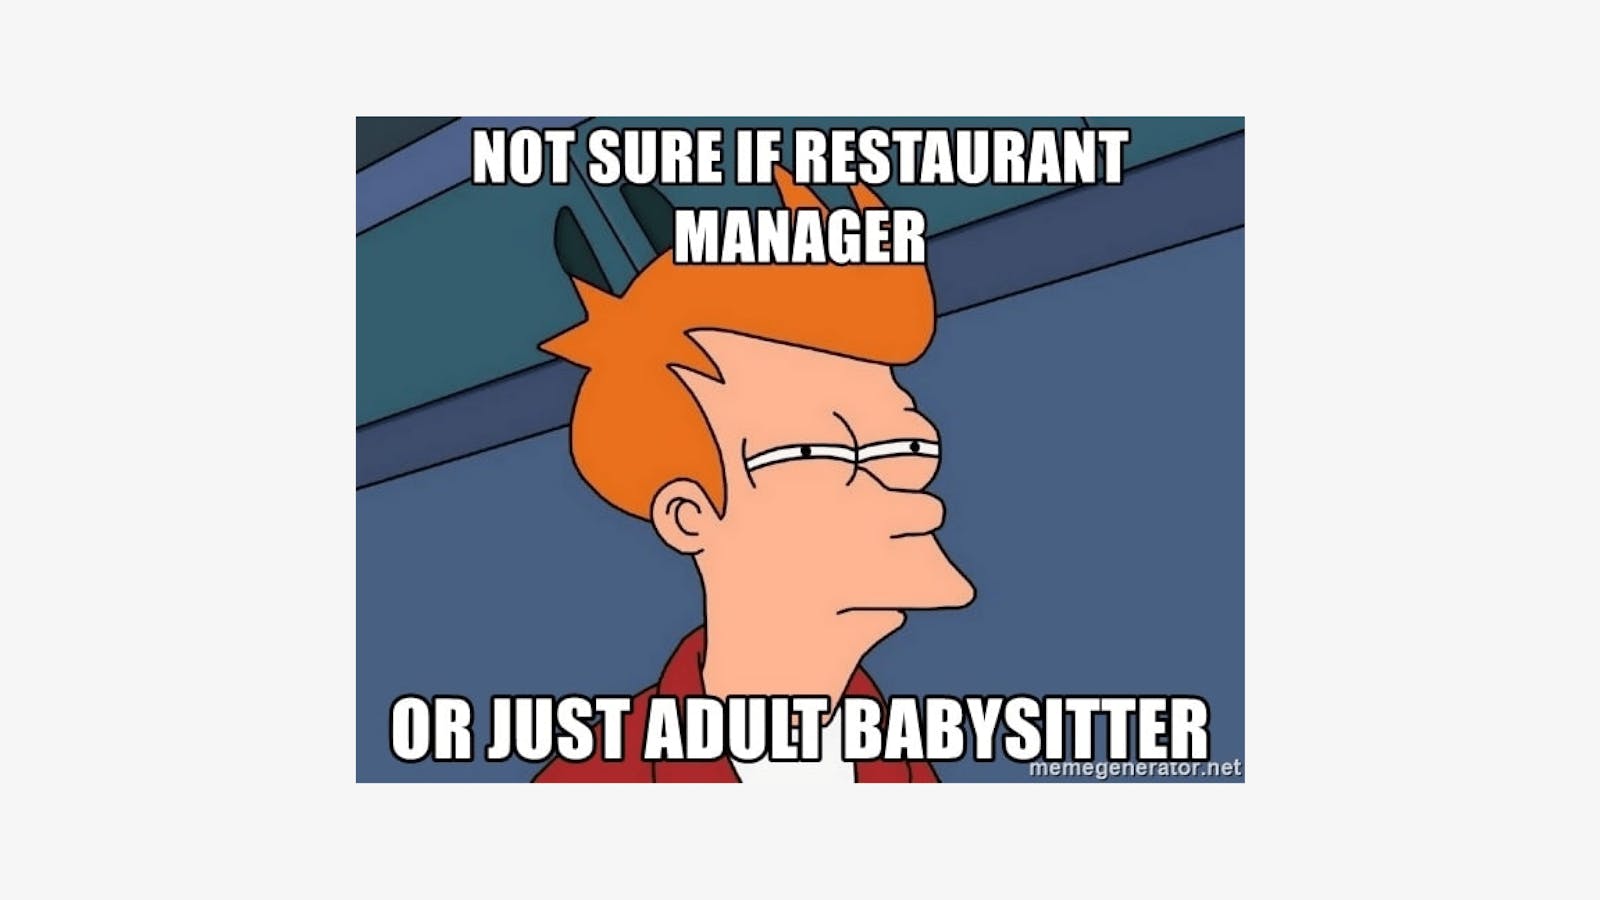 Funny meme for restaurant managers about being an adult babysitter. 